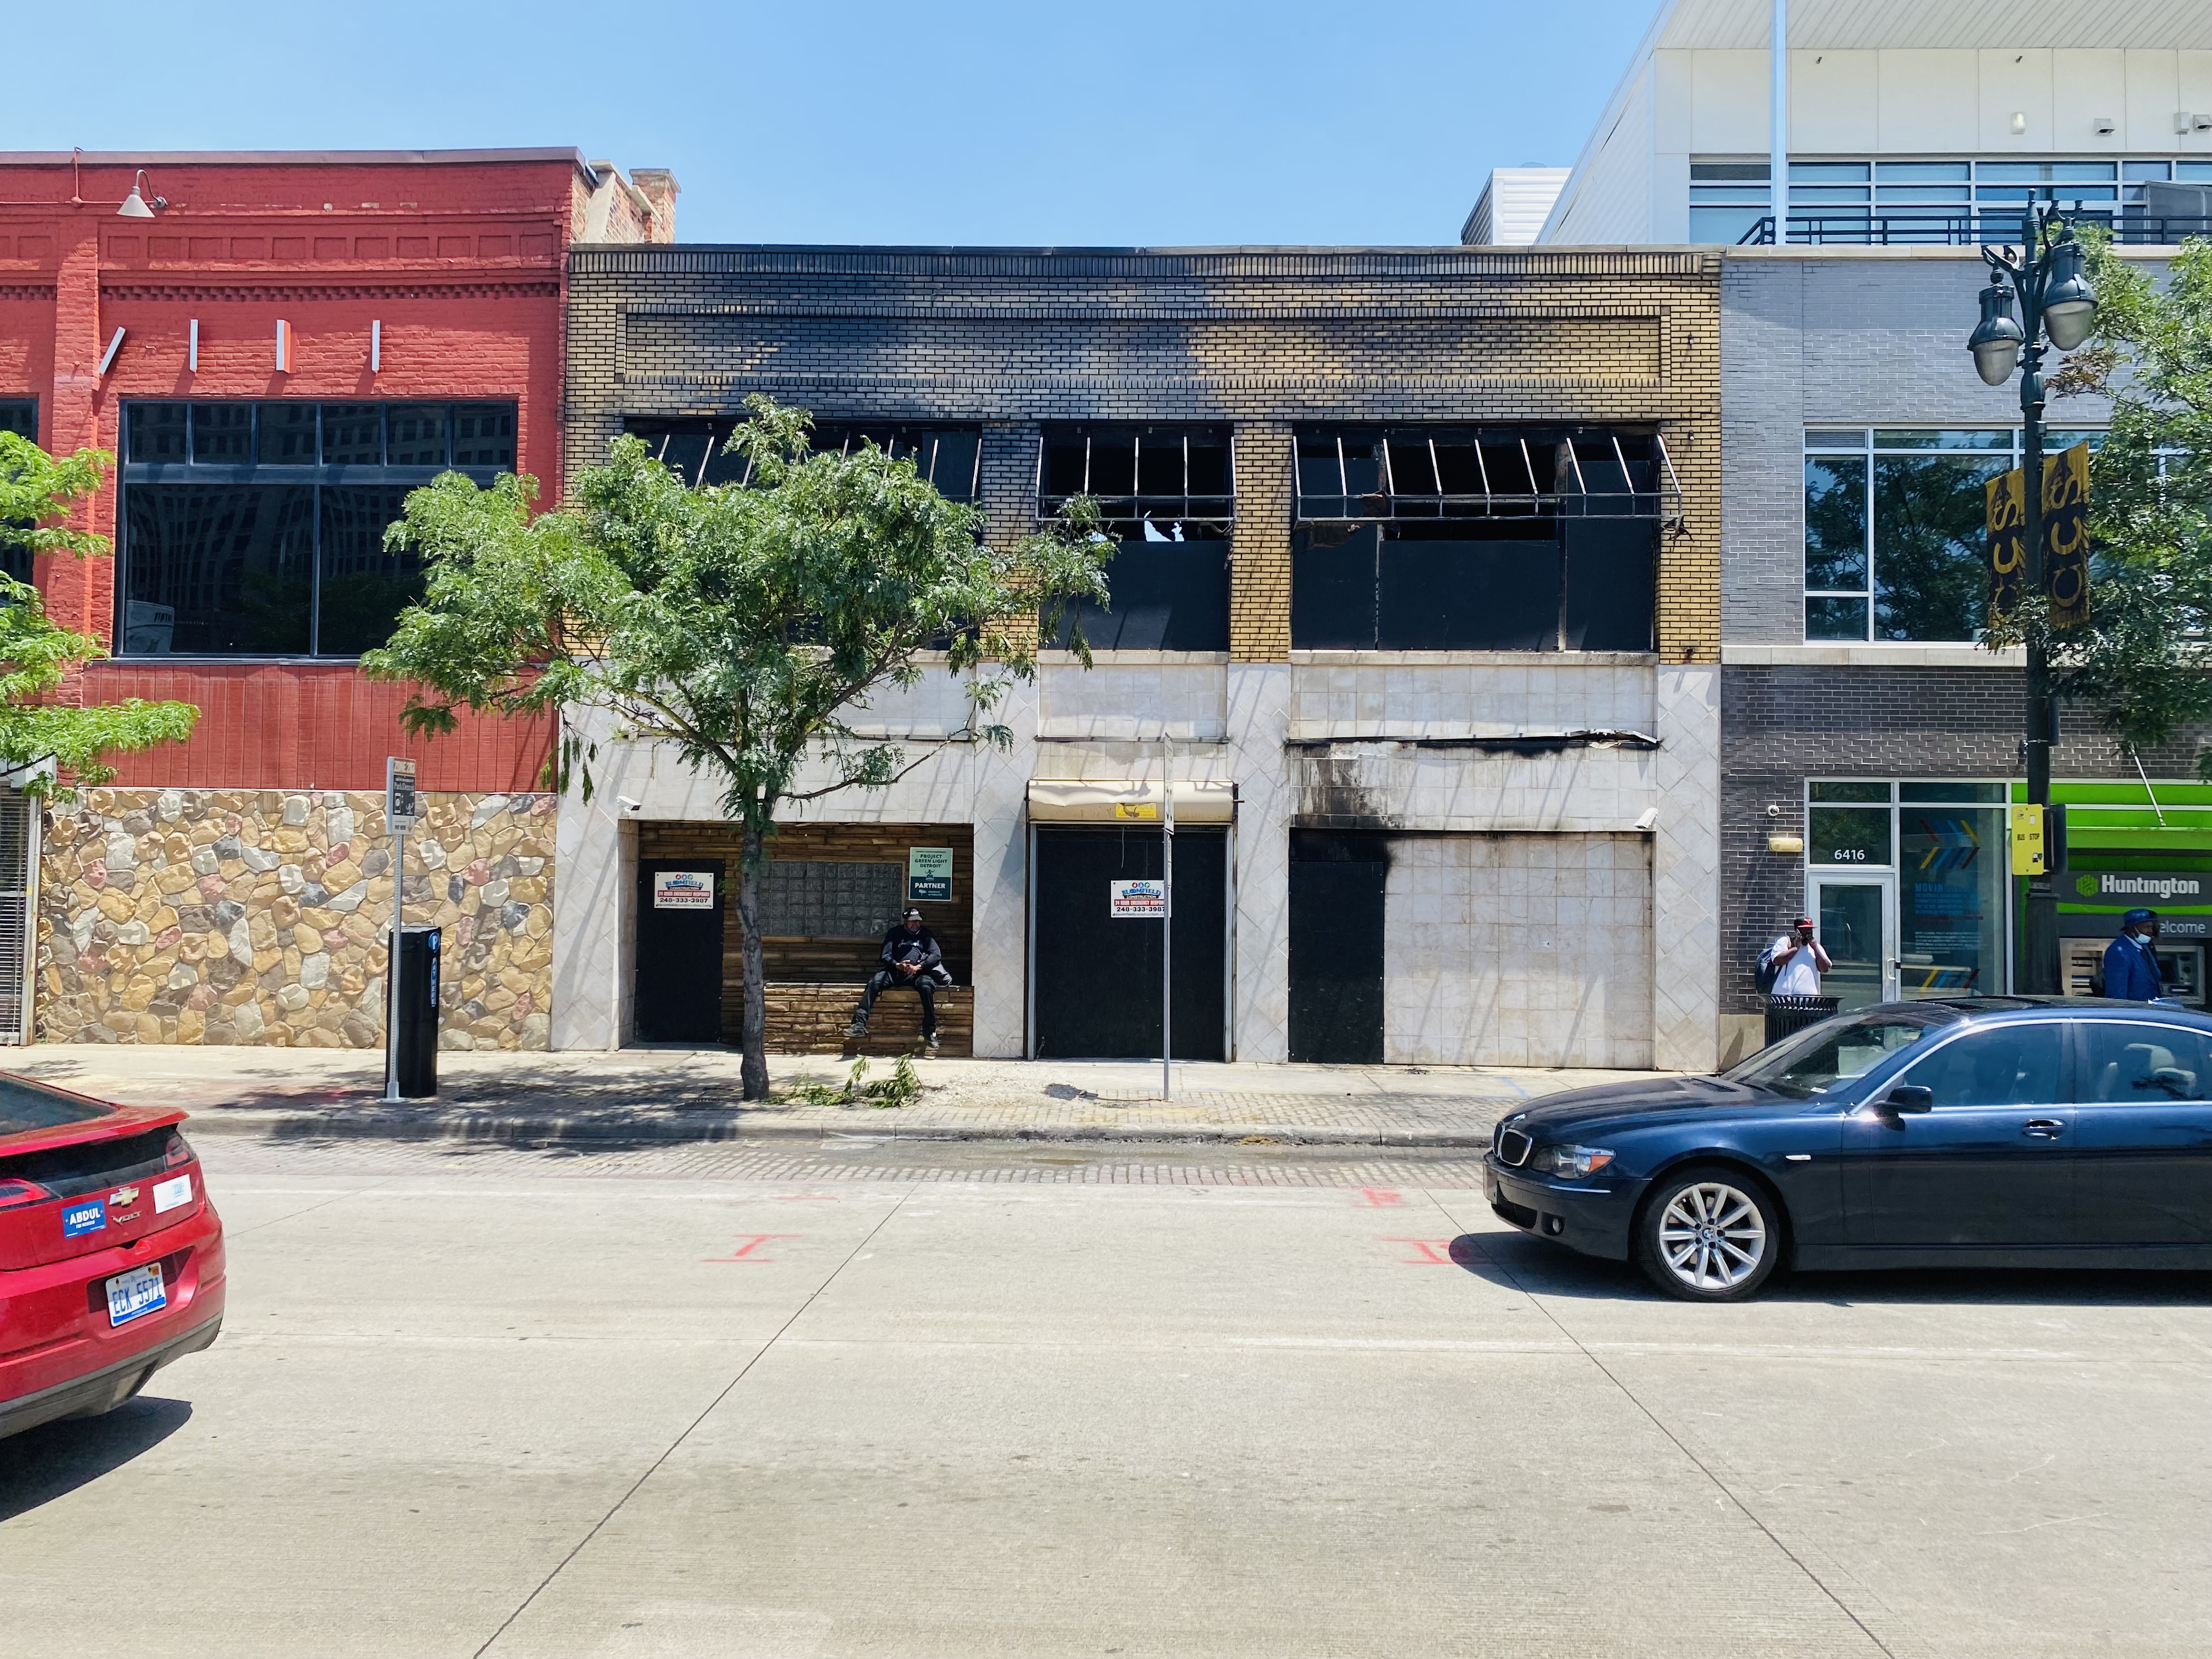 A brick building partially boarded up with fire and smoke damage visible on the exterior on Woodward Avenue in Detroit’s New Center area